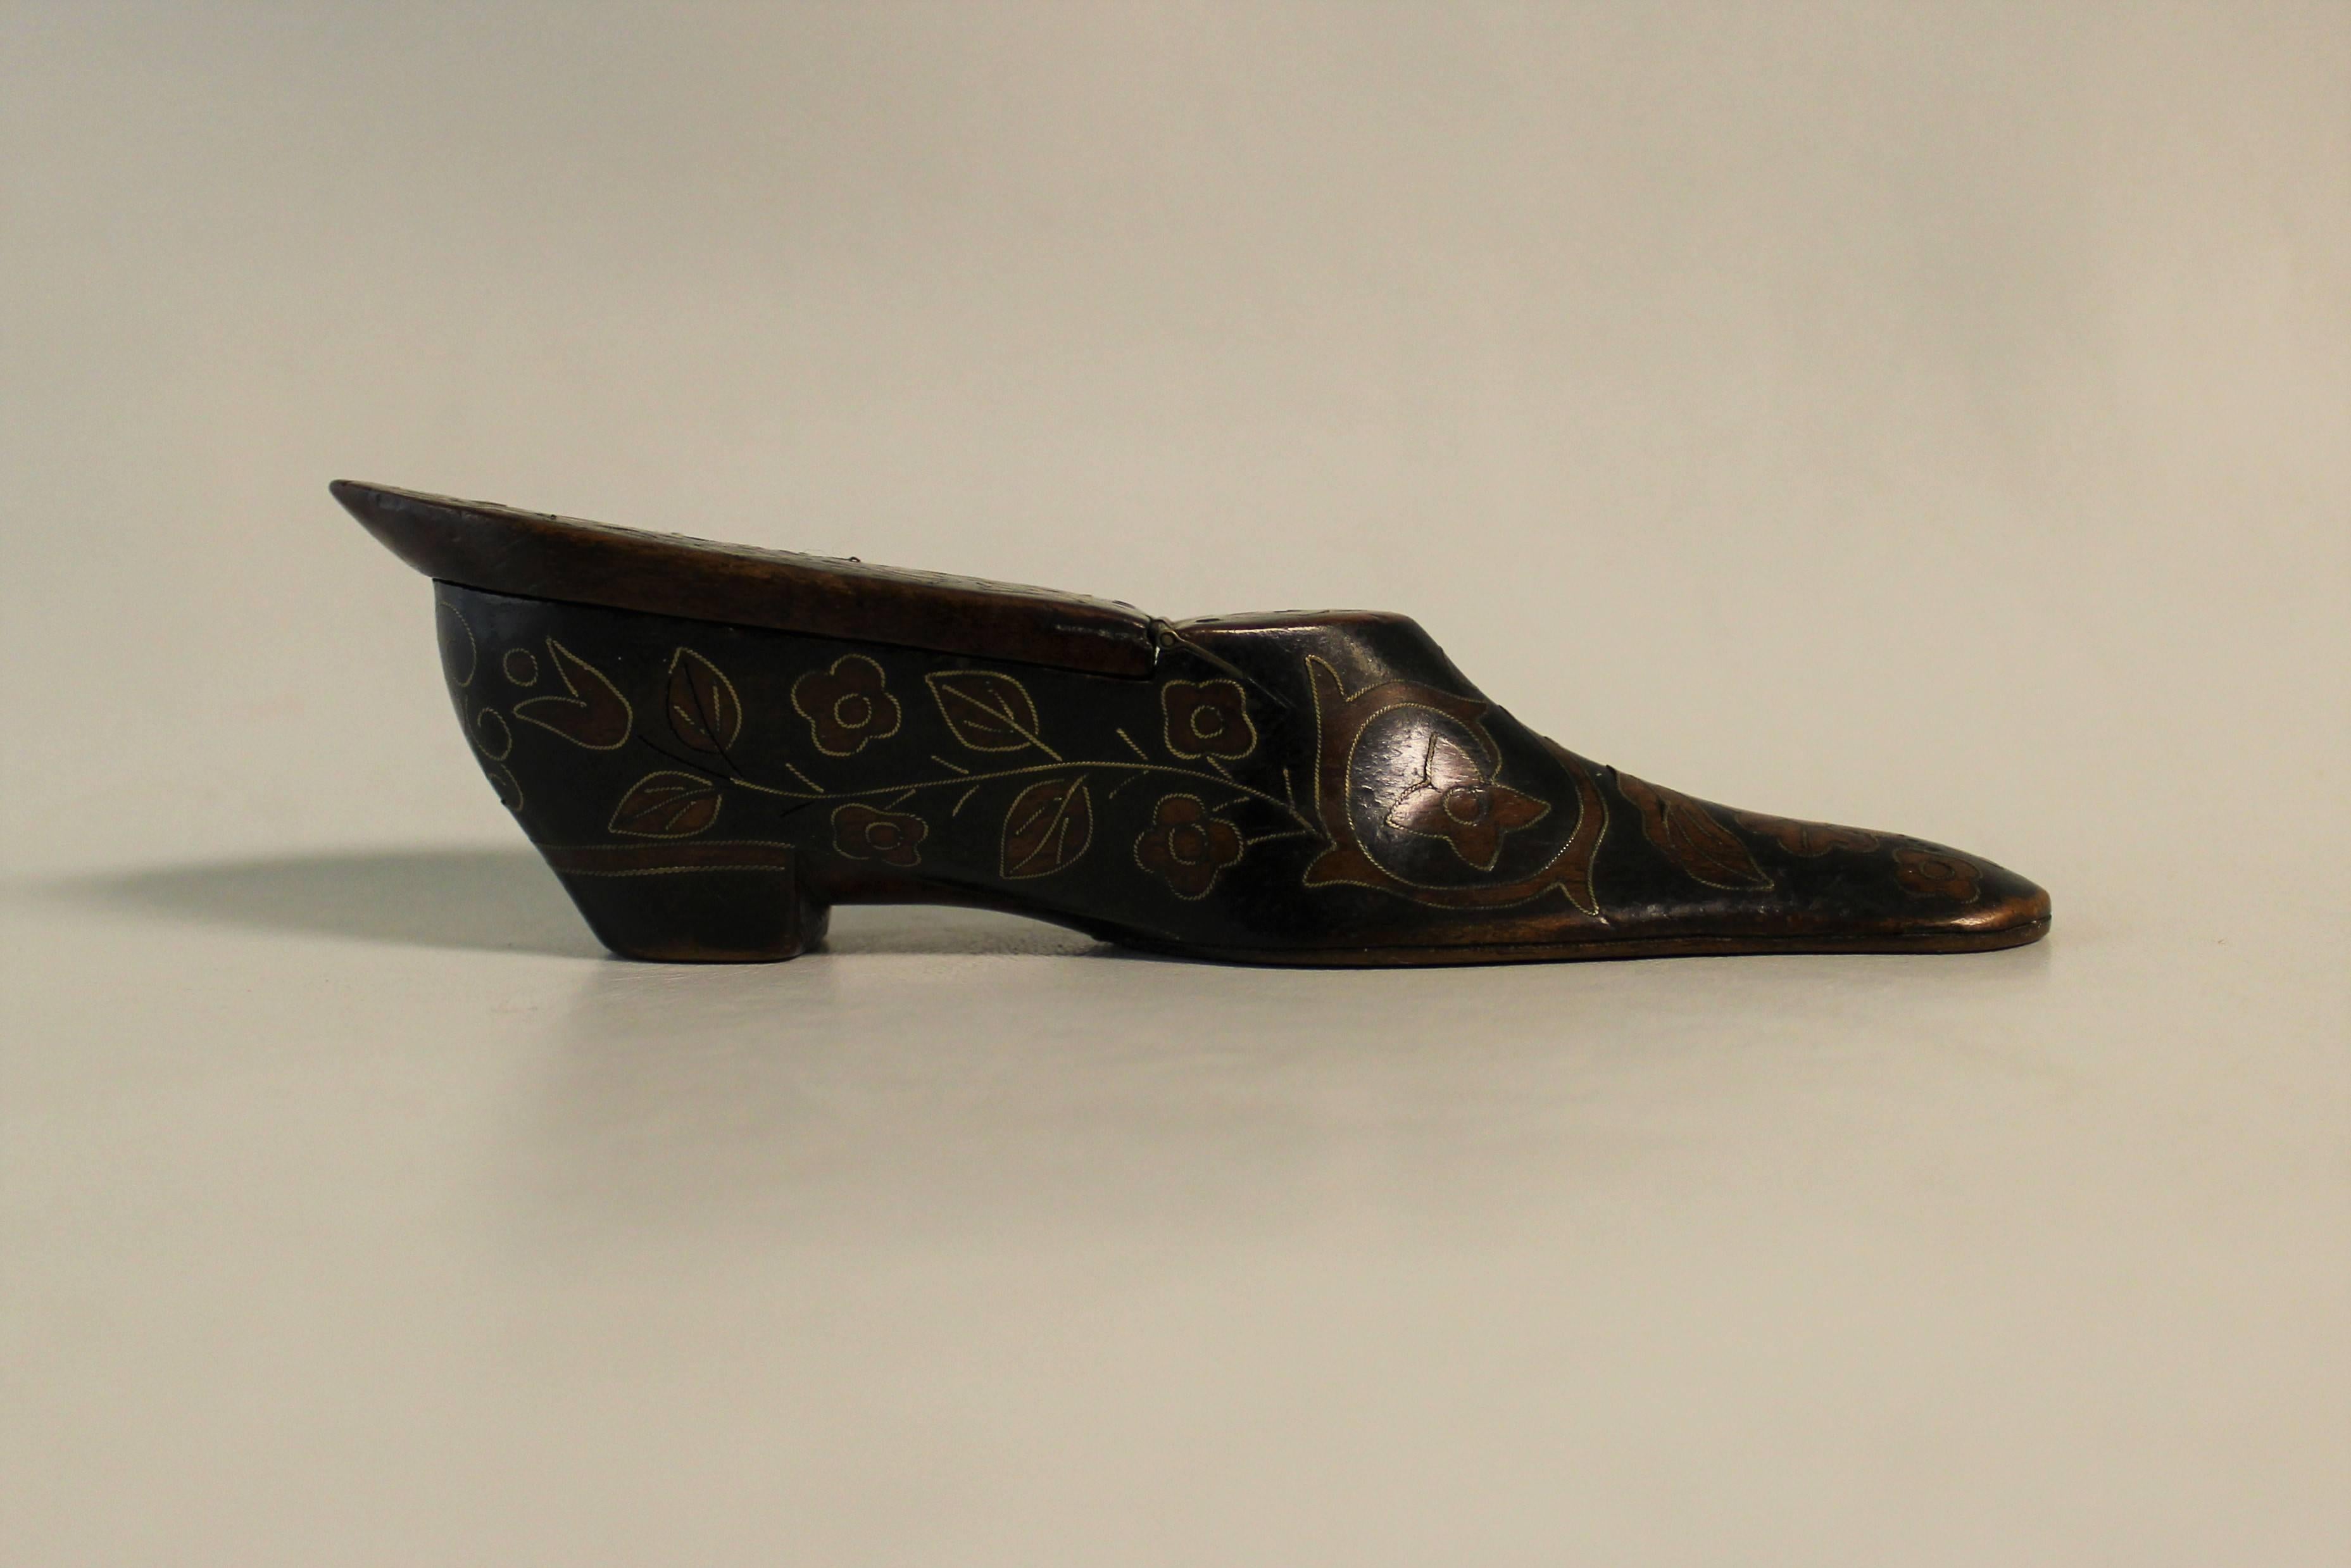 In the 19th century, boots and shoes were symbols of good luck. So, it was only natural that trinkets and personal objects should take the form of footwear. This snuffbox, dating to the Georgian era is an excellent example of that phenomenon. The